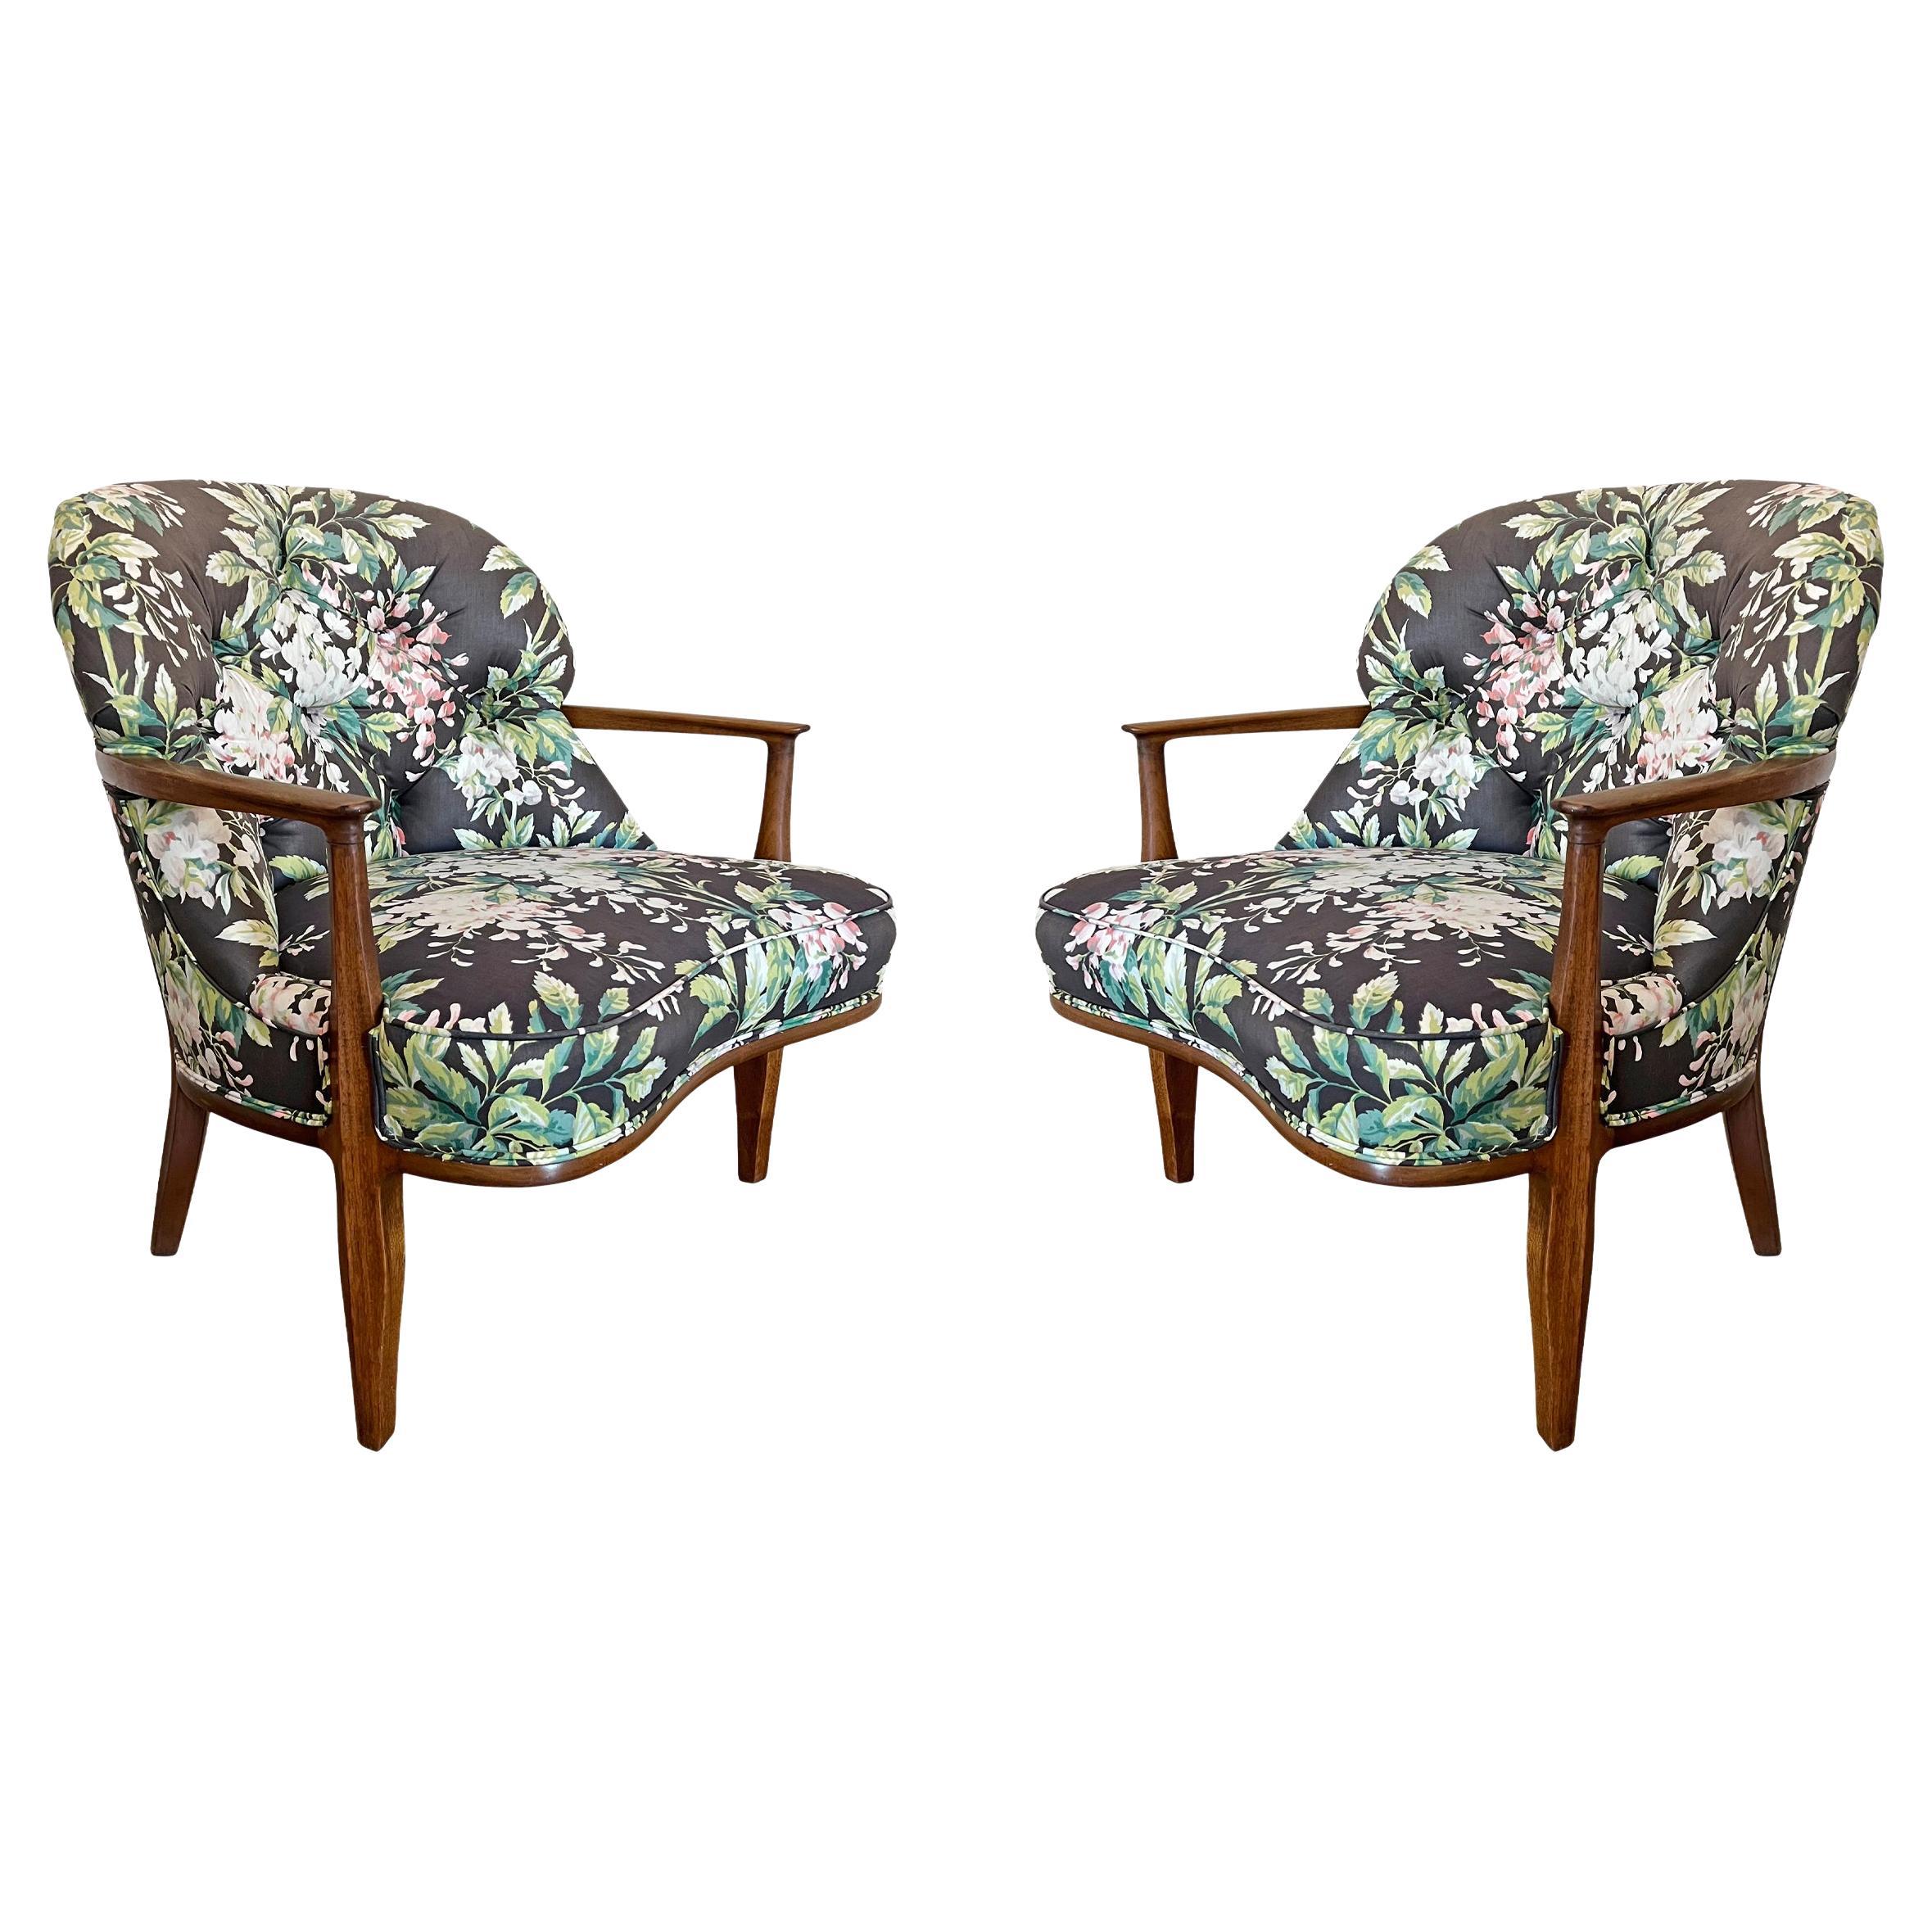 Pair of Janus Lounge Chairs by Edward Wormley